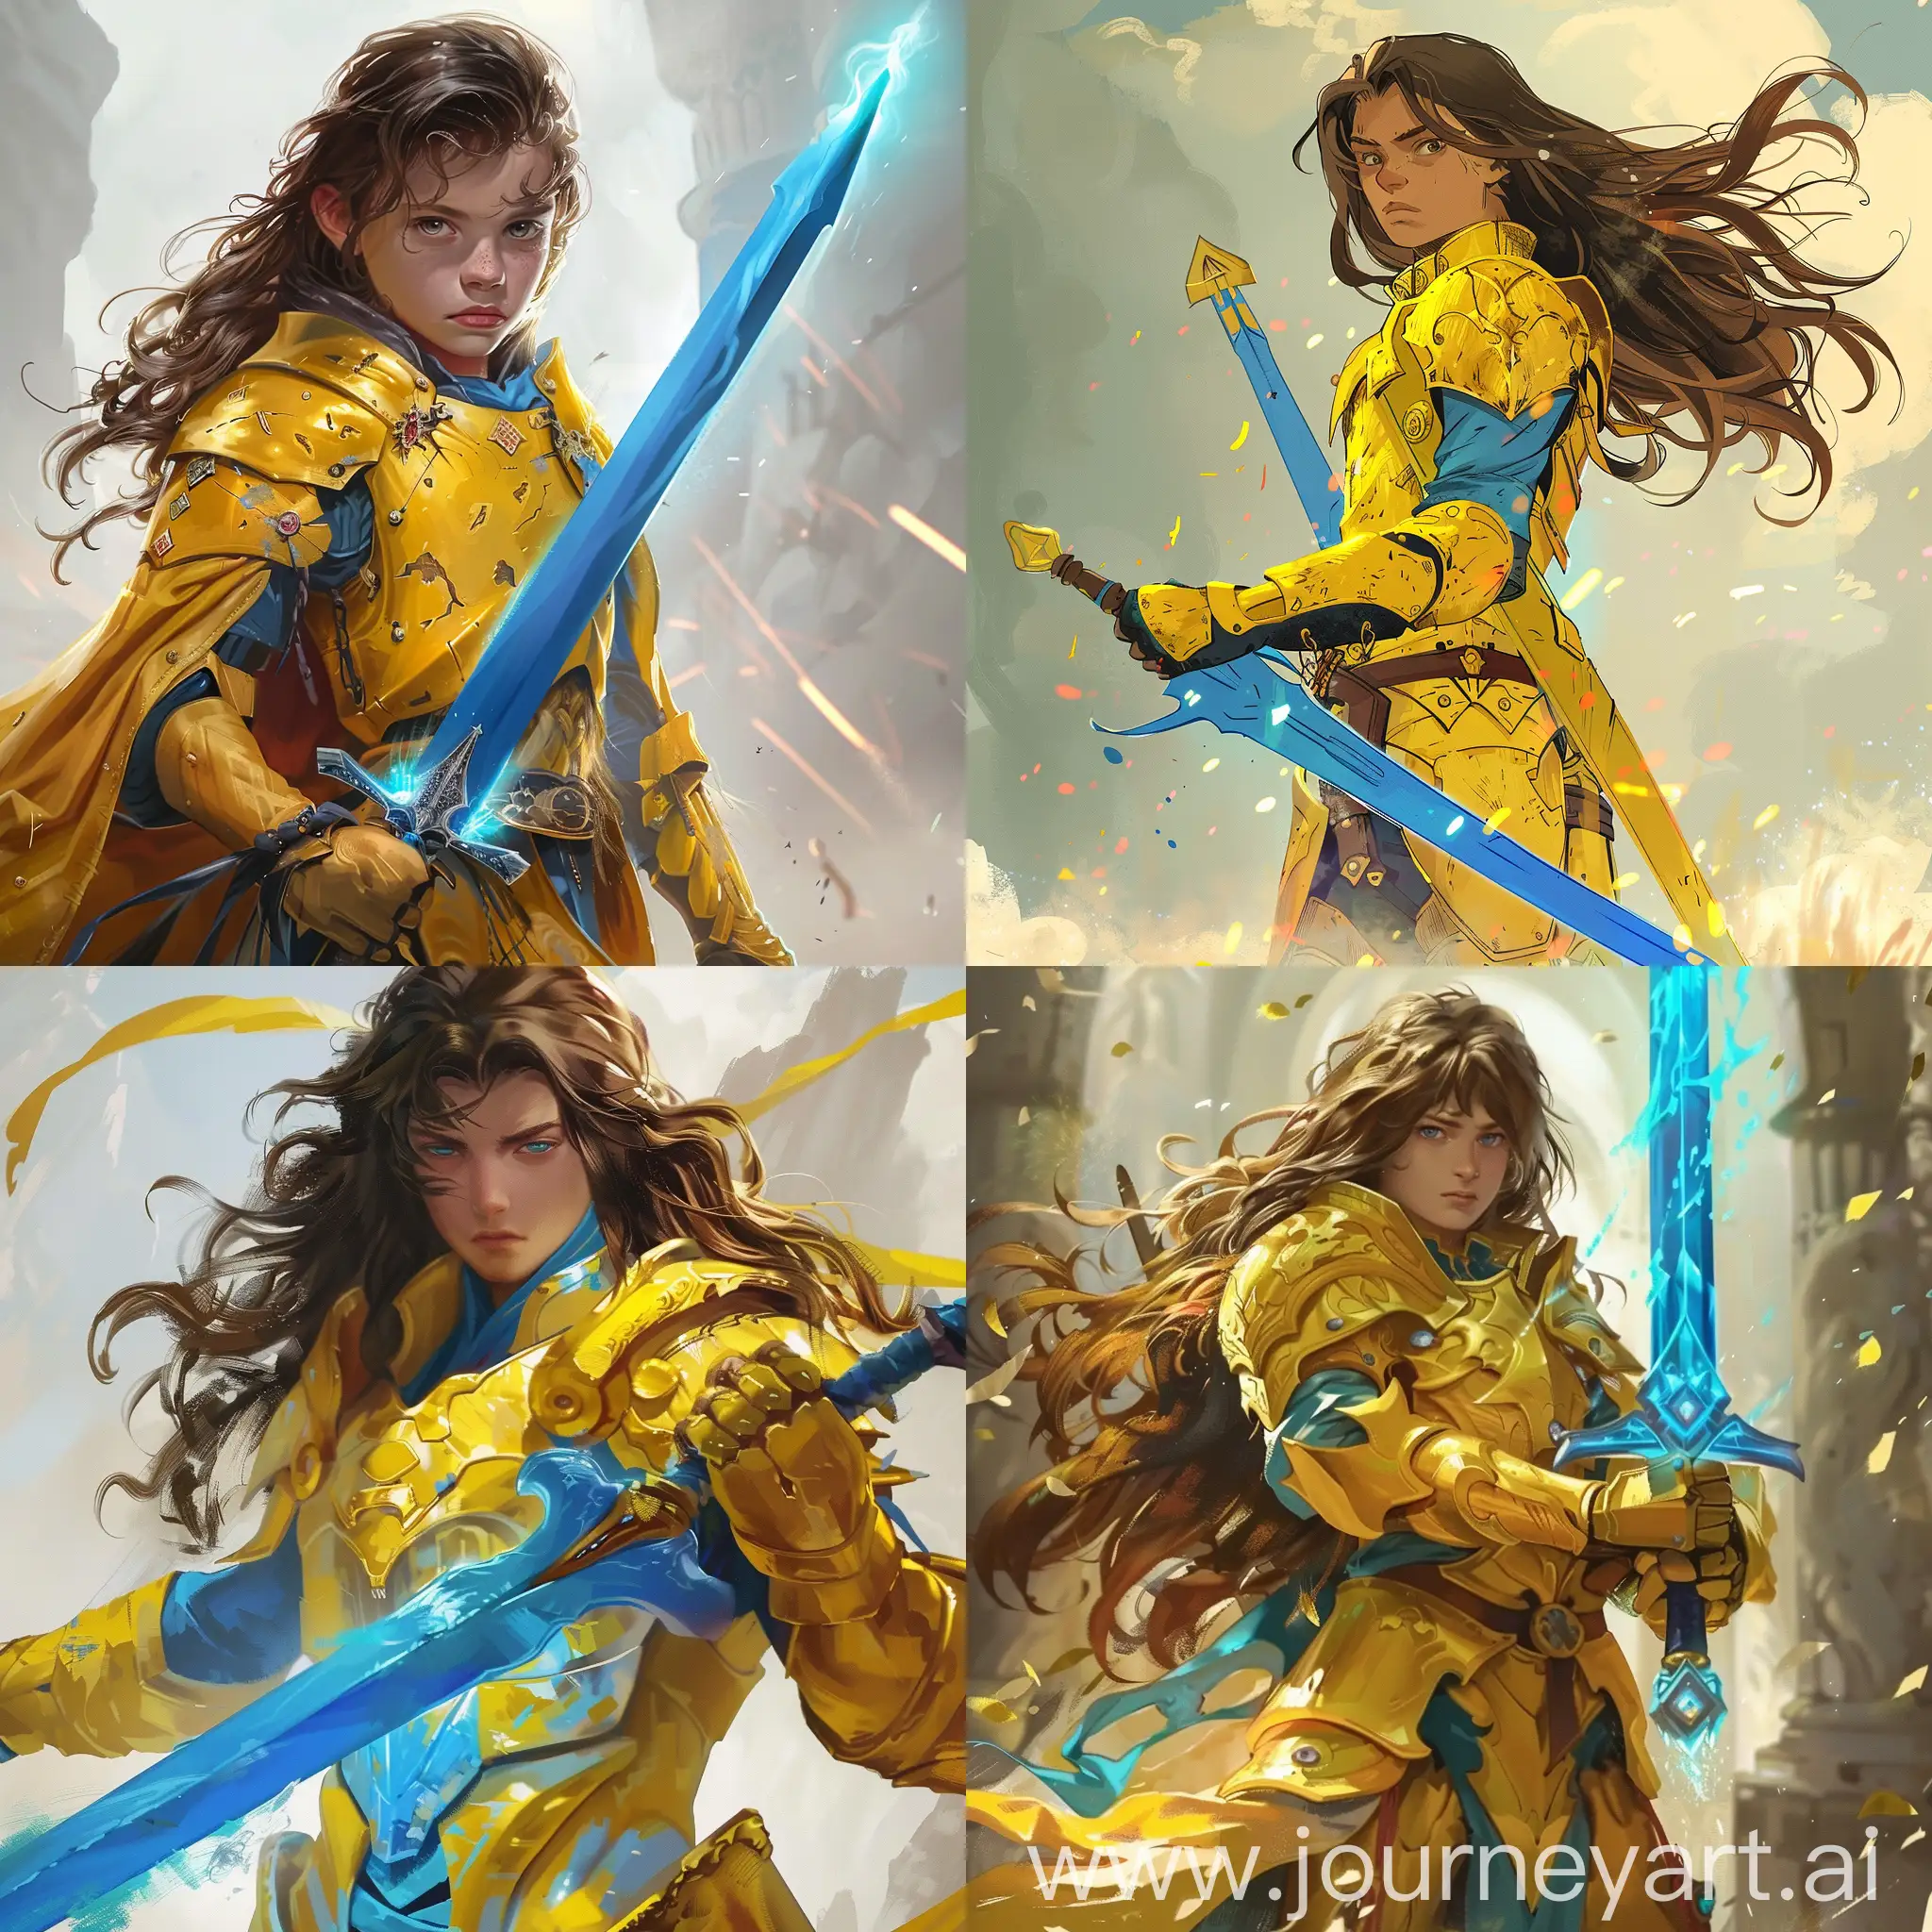 A boy with a blue sword and yellow armor with long brown hair